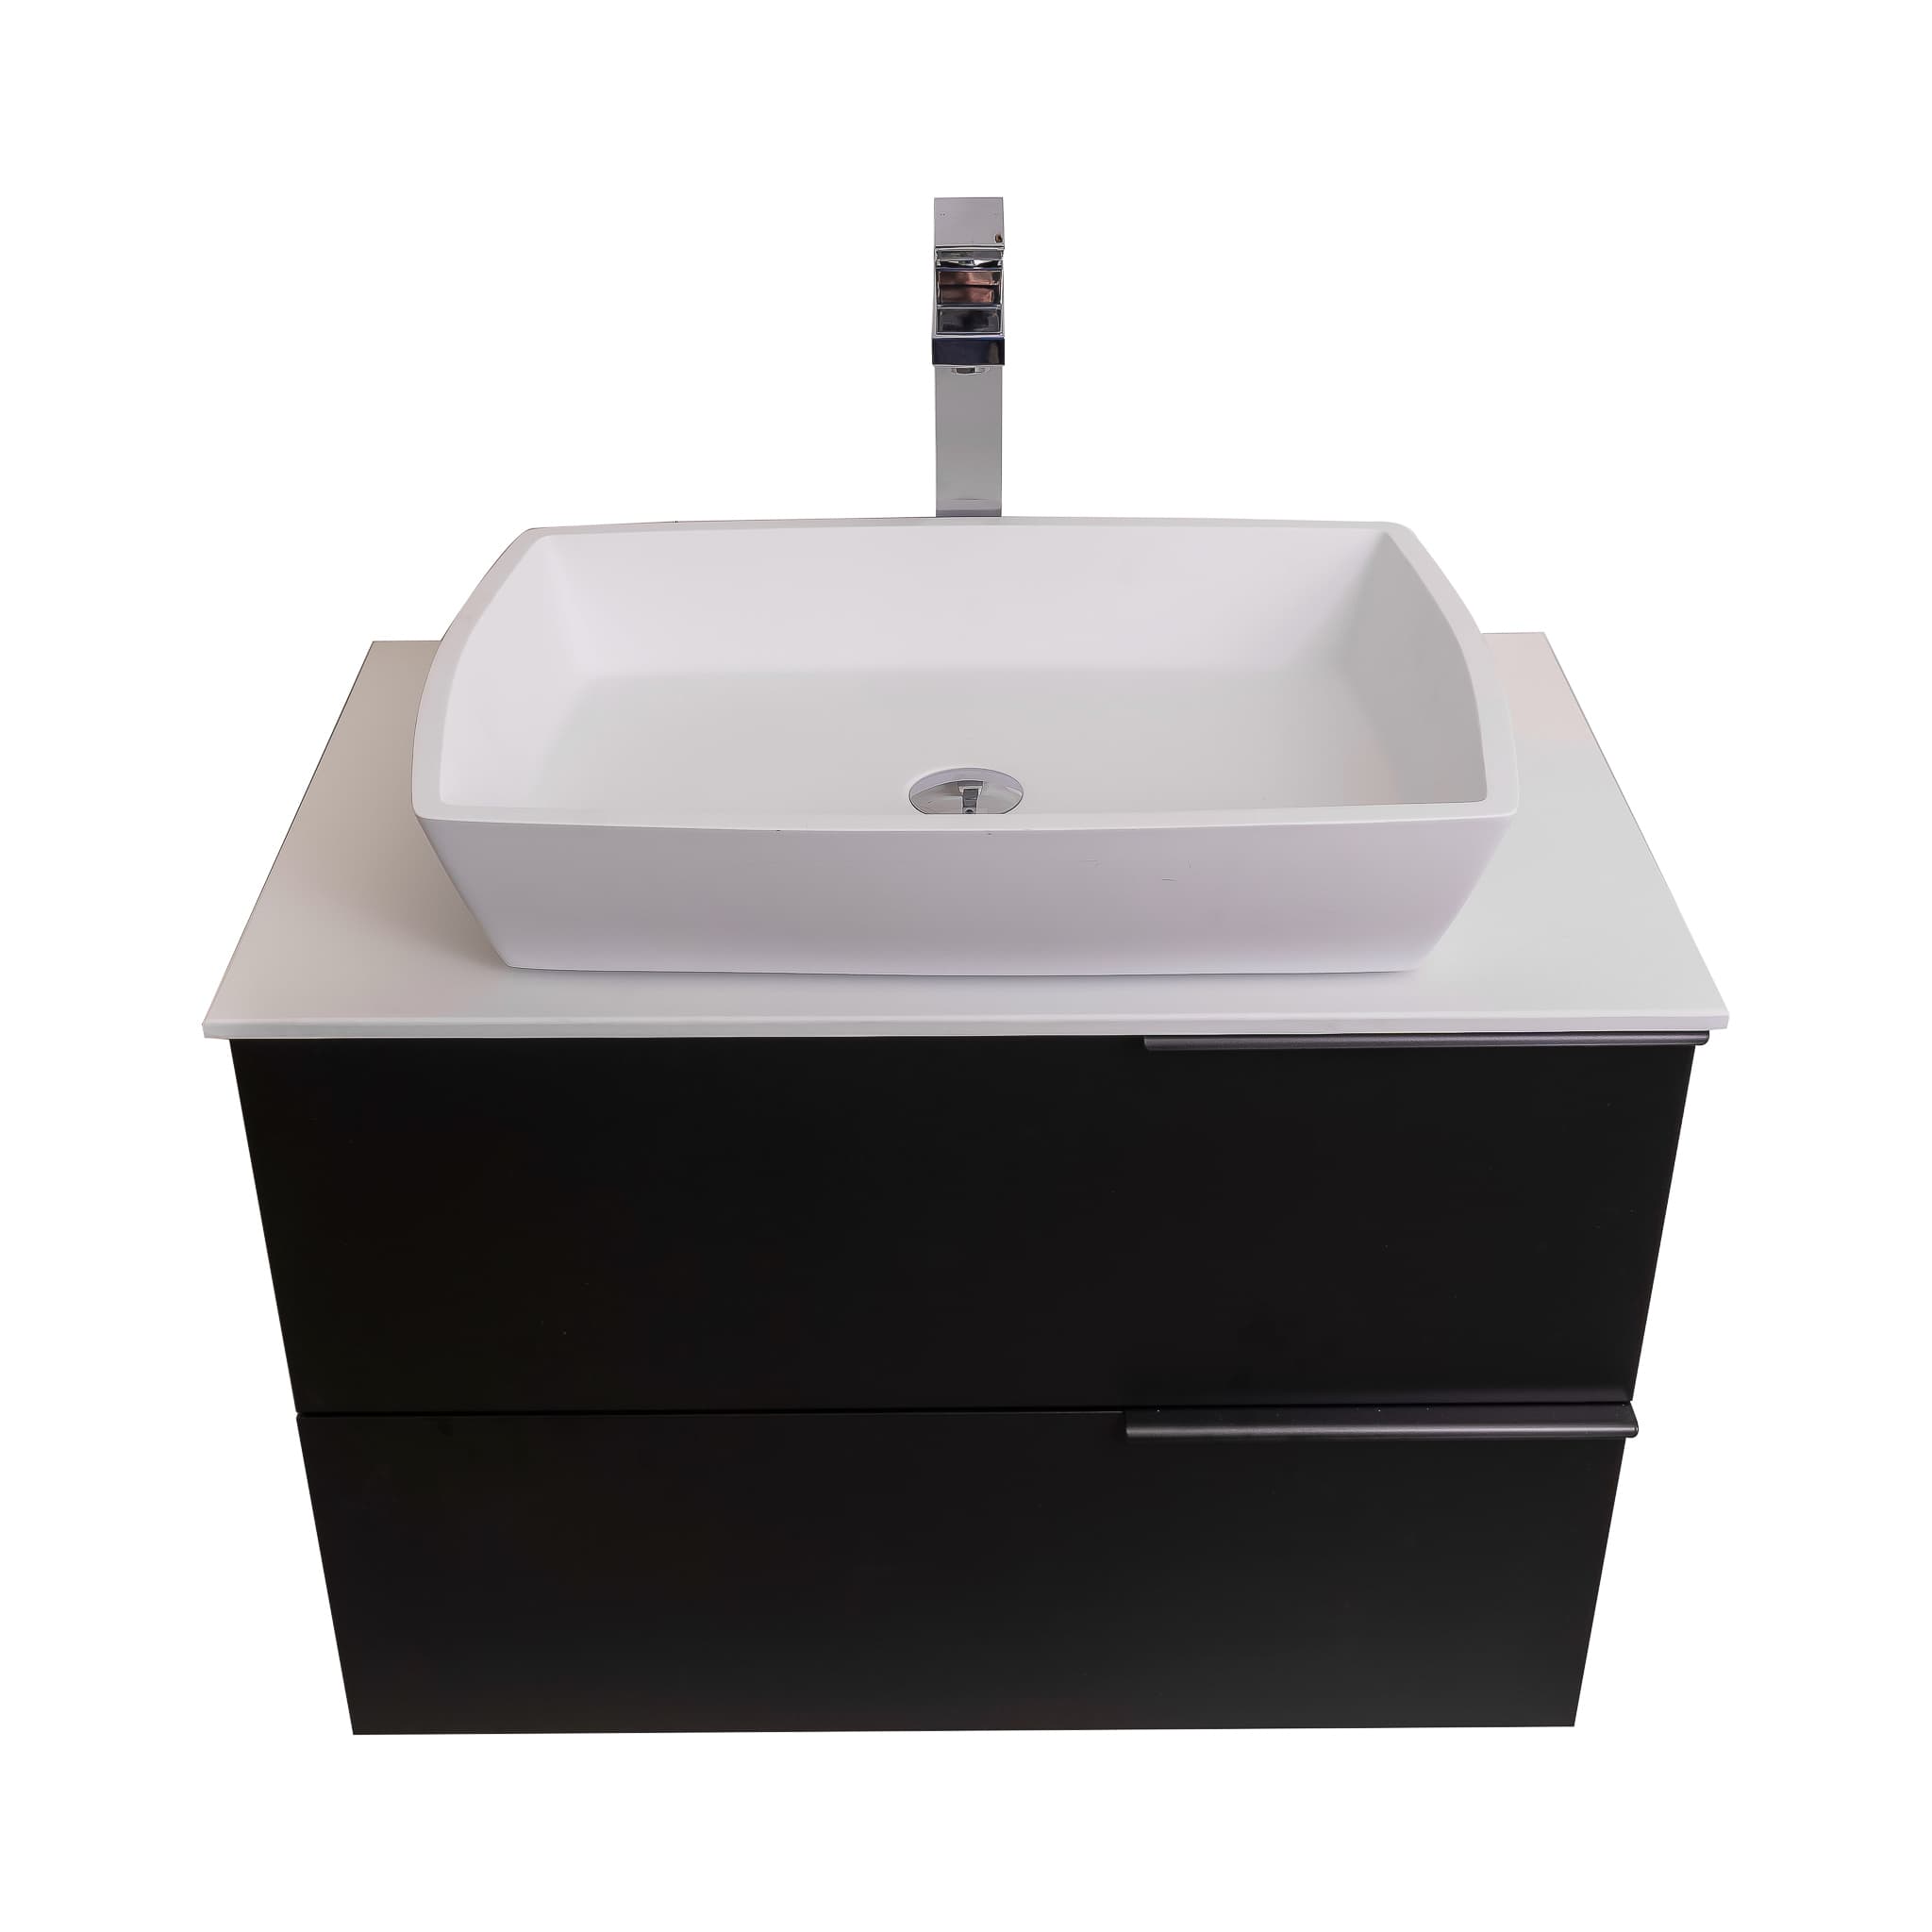 Mallorca 31.5 Matte Black Cabinet, Solid Surface Flat White Counter And Square Solid Surface White Basin 1316, Wall Mounted Modern Vanity Set